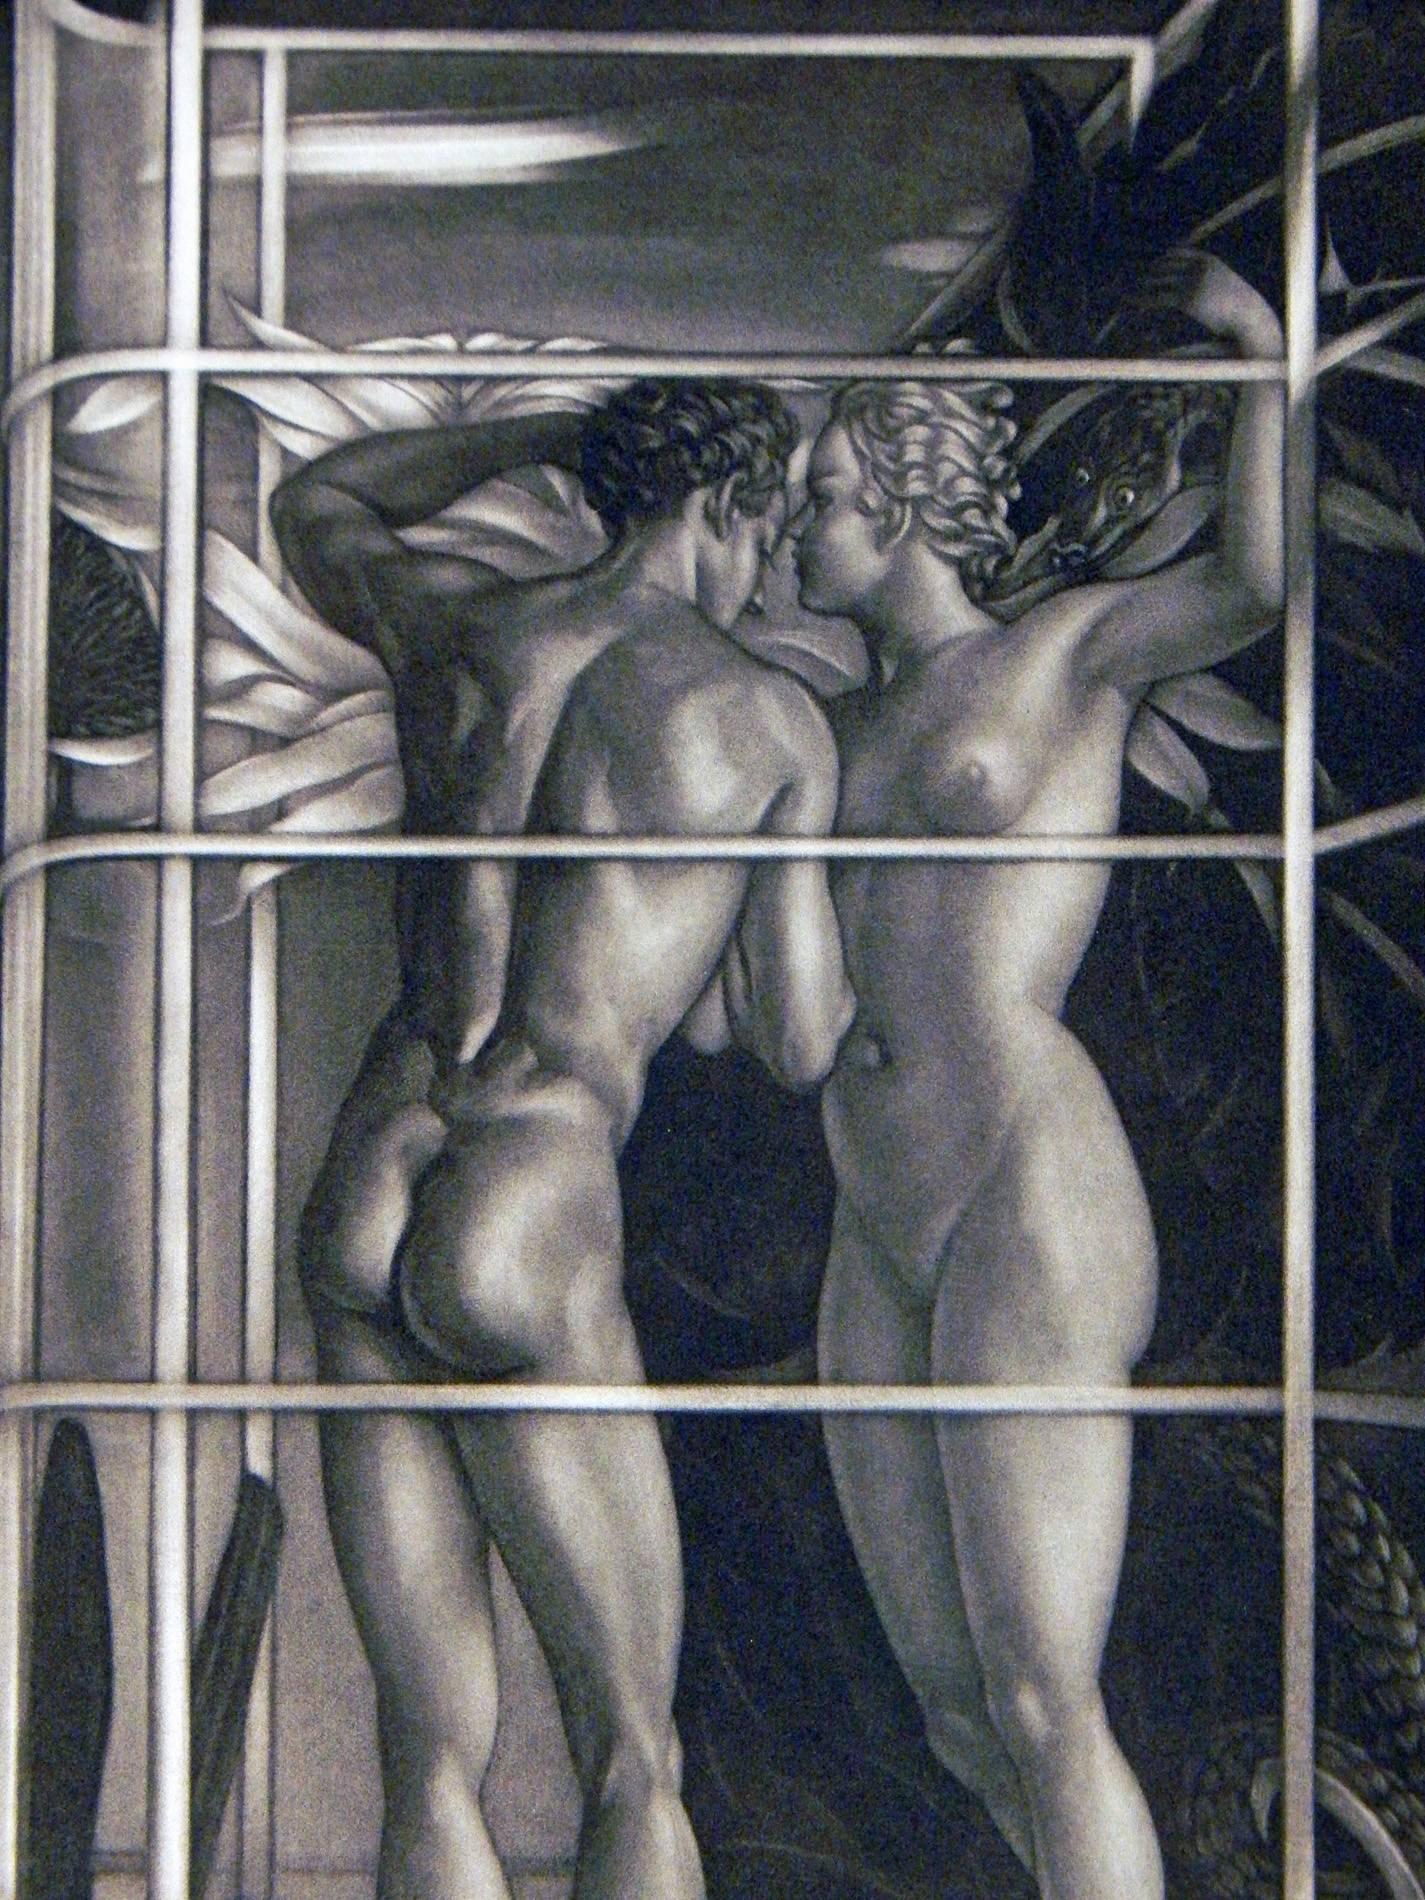 An extraordinary and rare print by Robert Charles Peter, a British artist, this scene of a male and female nude, in a cage-like setting with lush plant forms in the background, seems to suggest that they are standing on the periphery of a giant